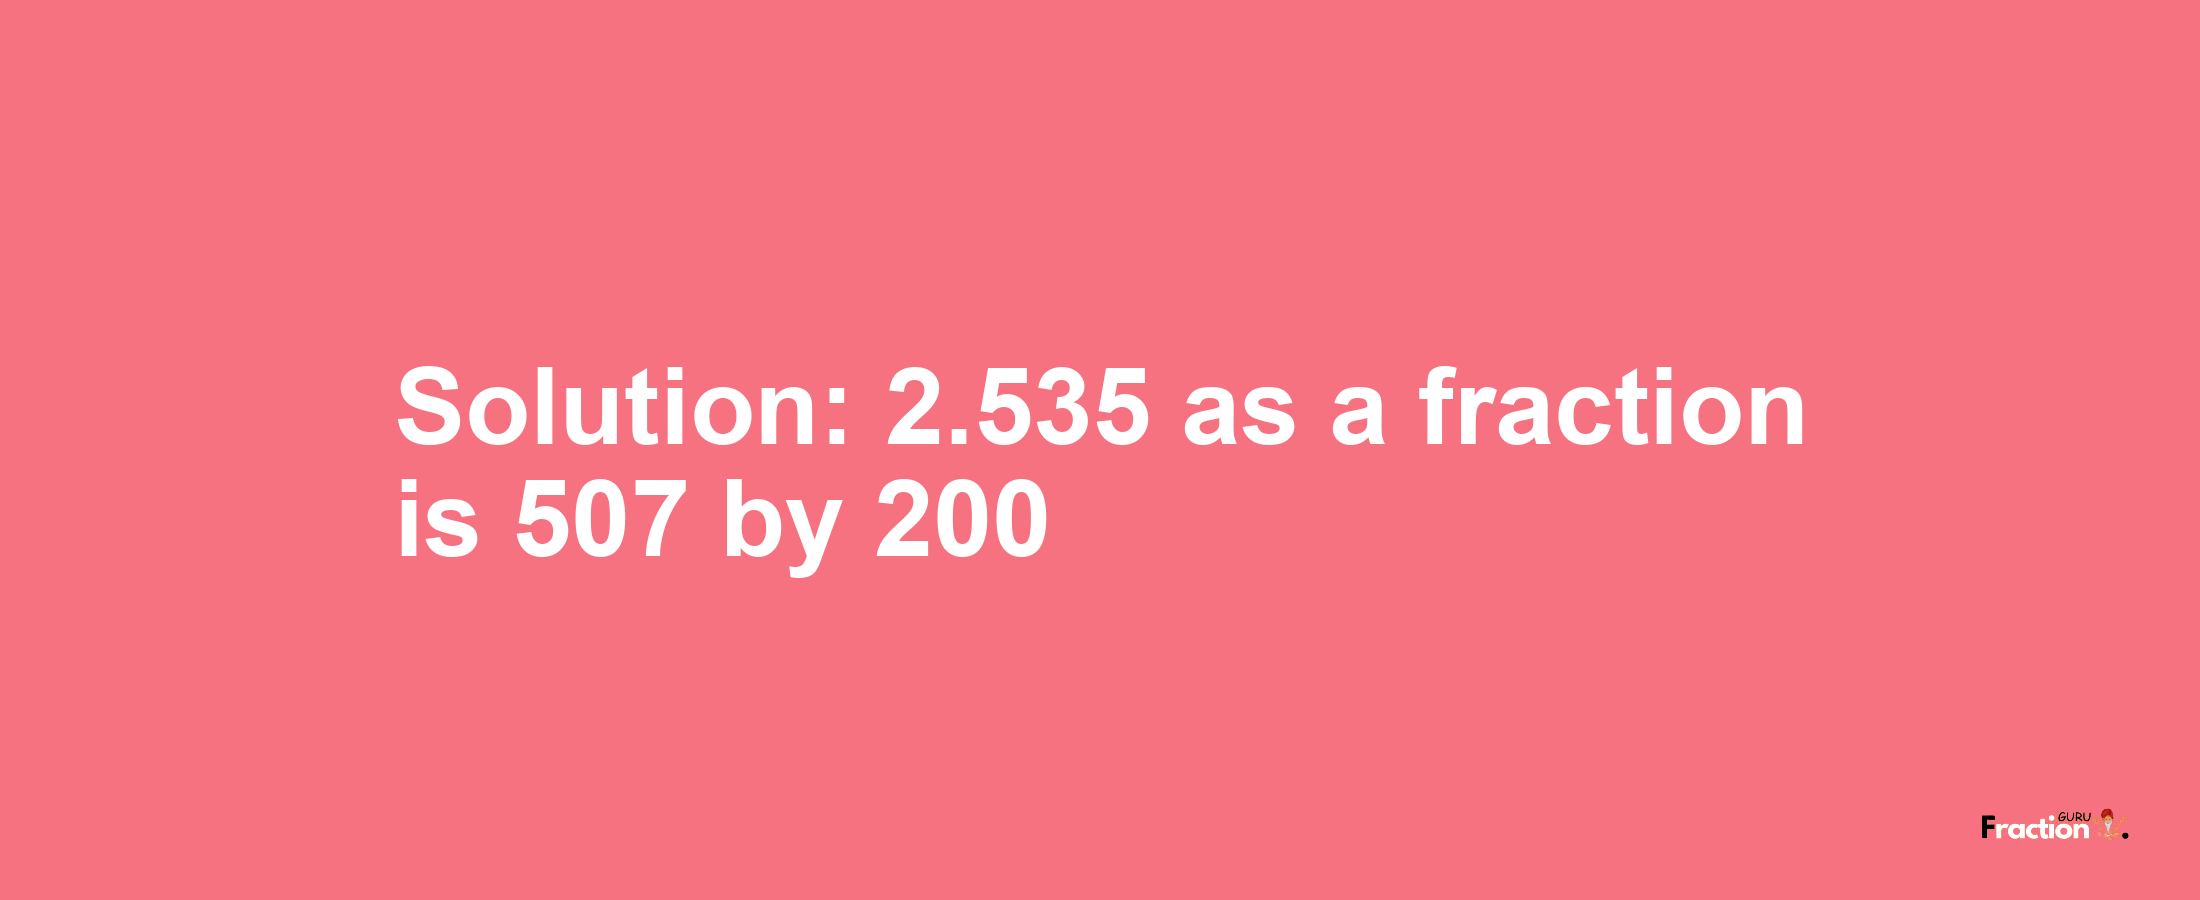 Solution:2.535 as a fraction is 507/200